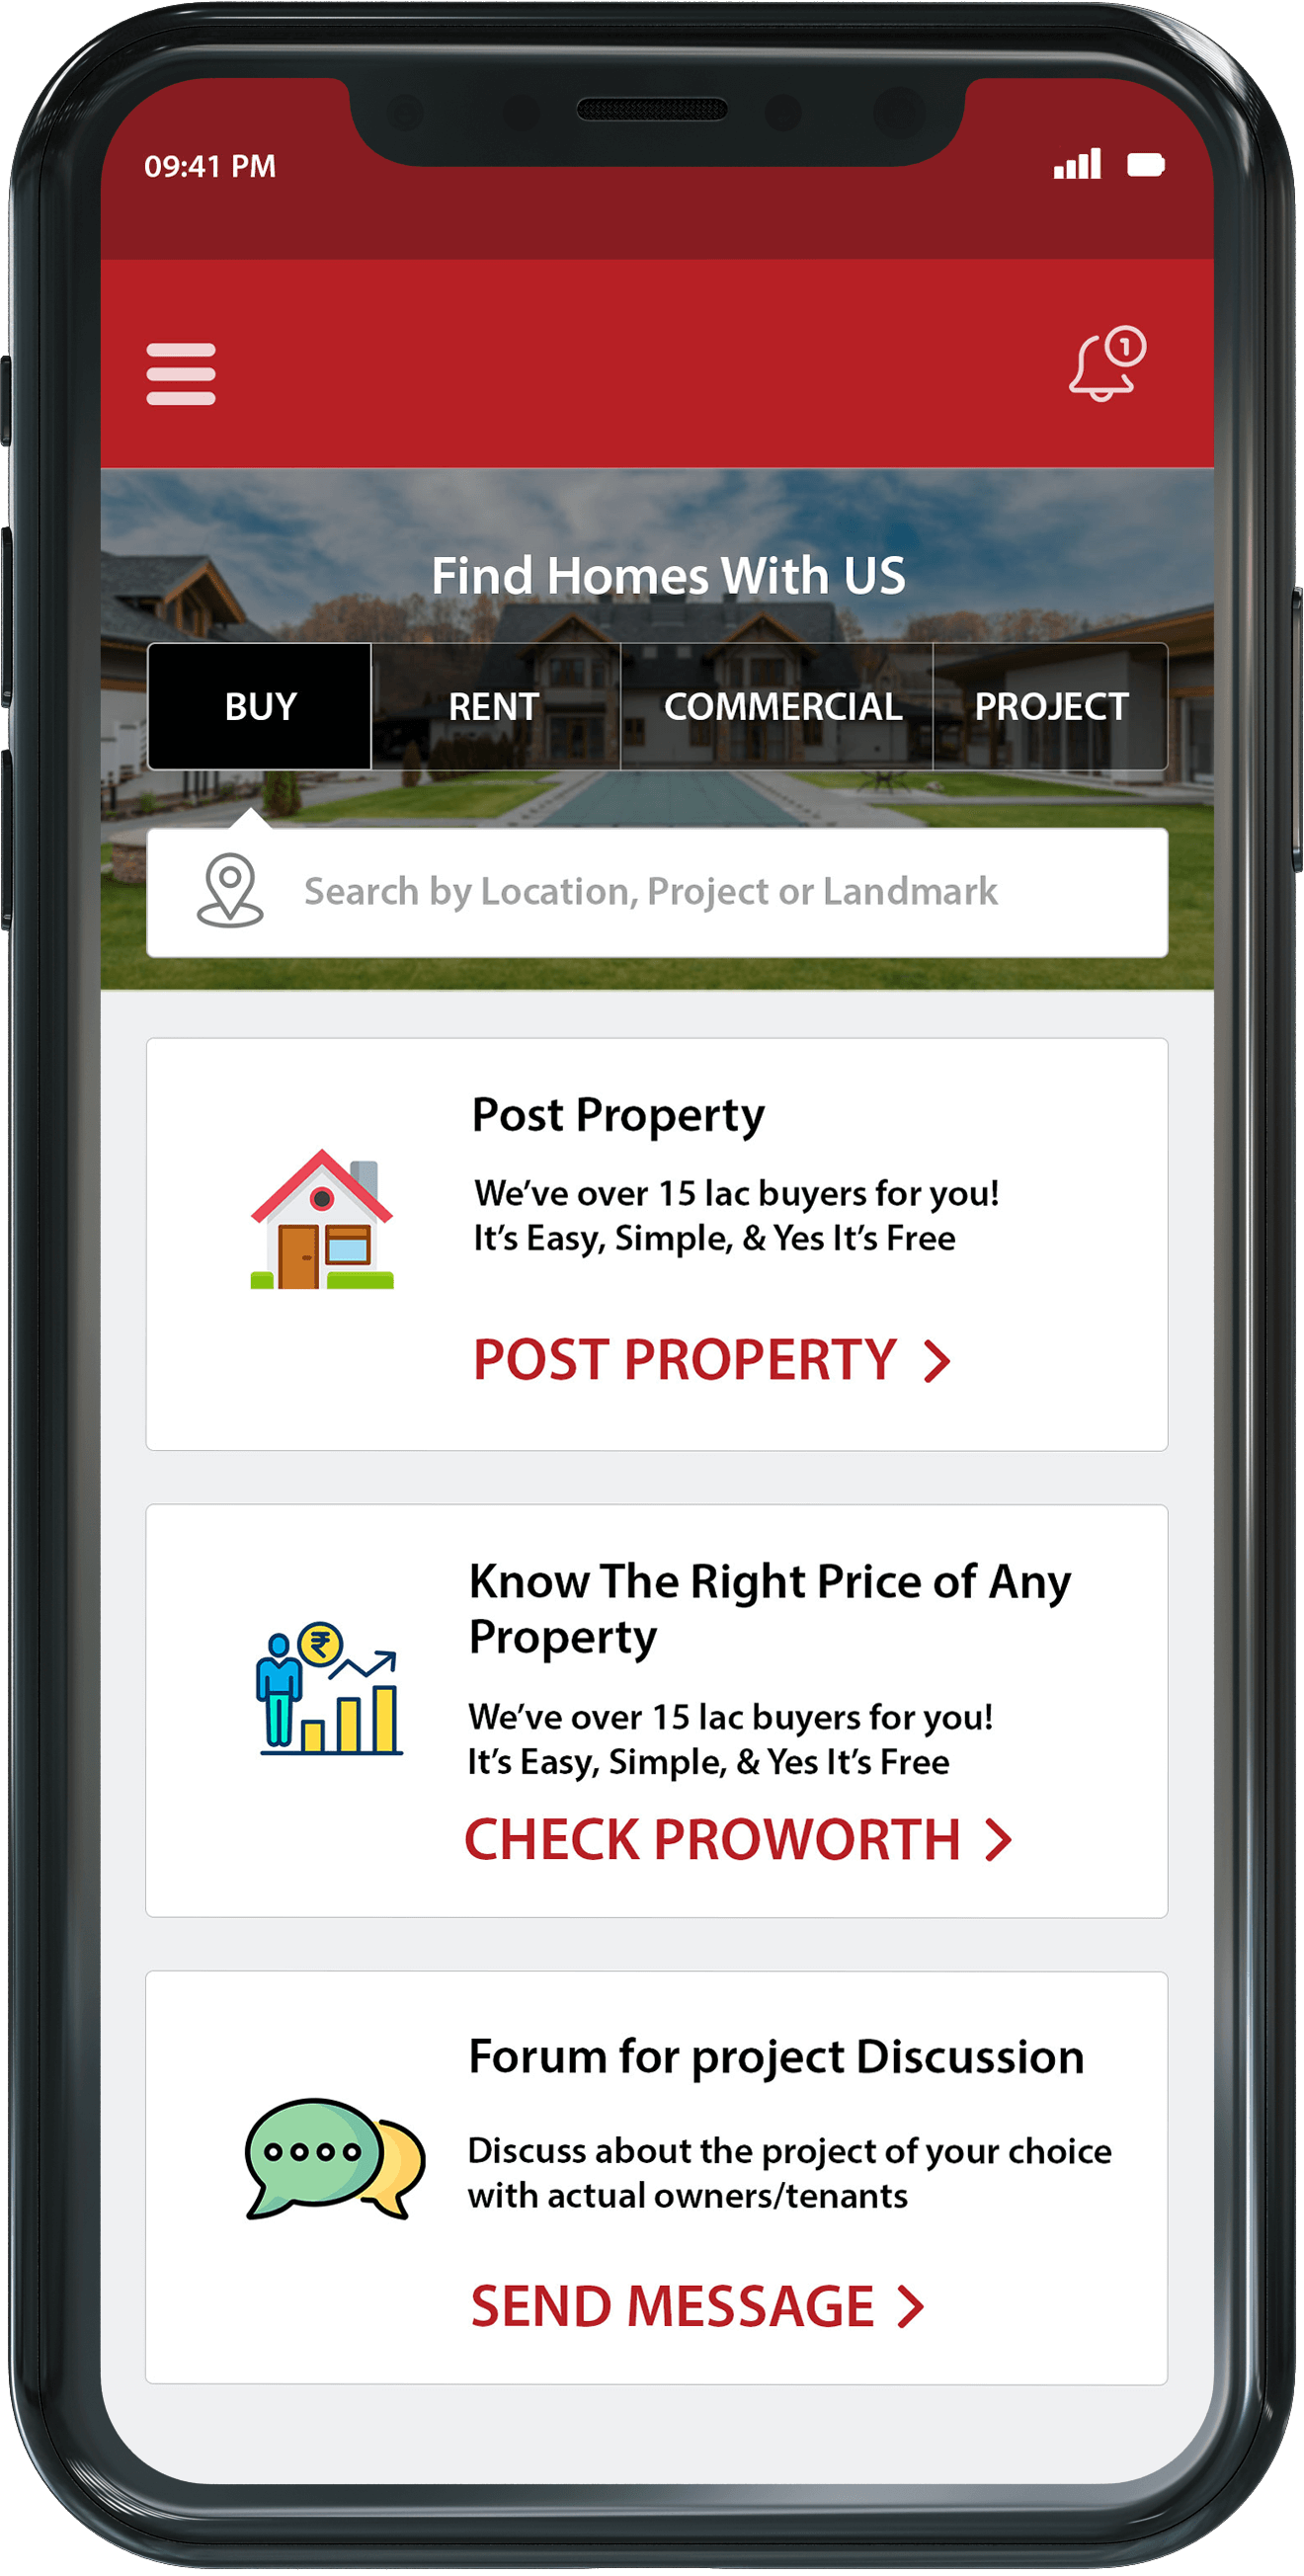 Airbnb Property Rental Clone App-Search Location